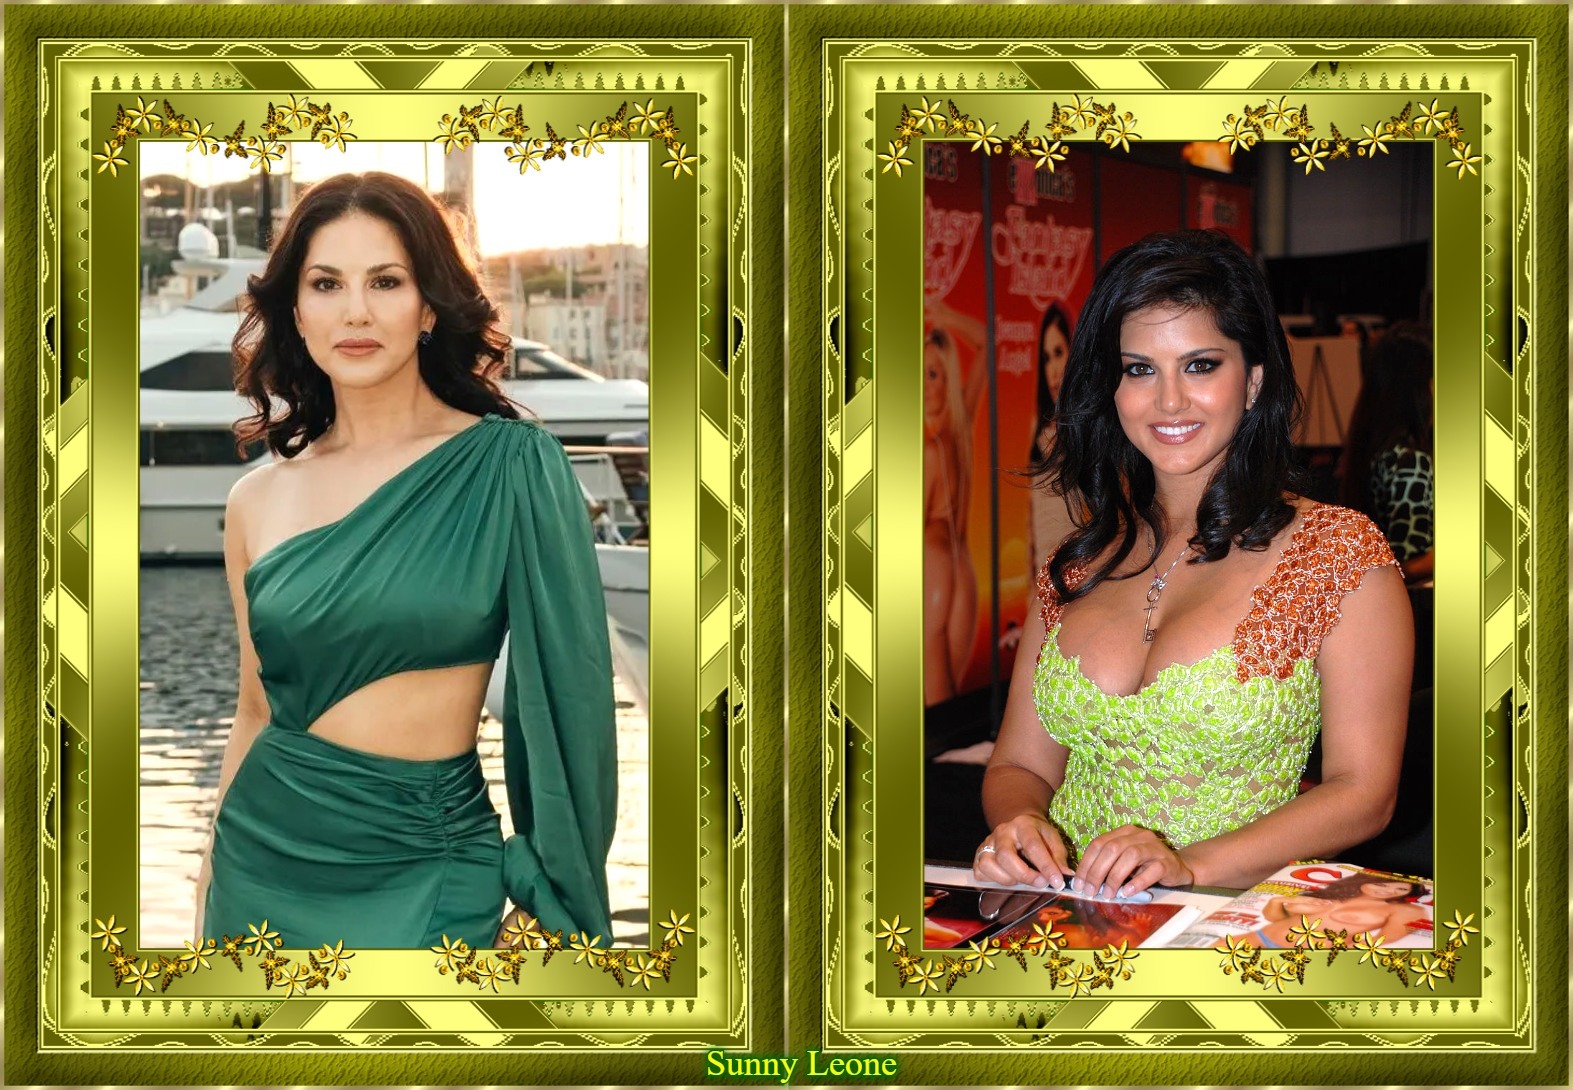 You are currently viewing “From Porn To Films- Sunny Leone”